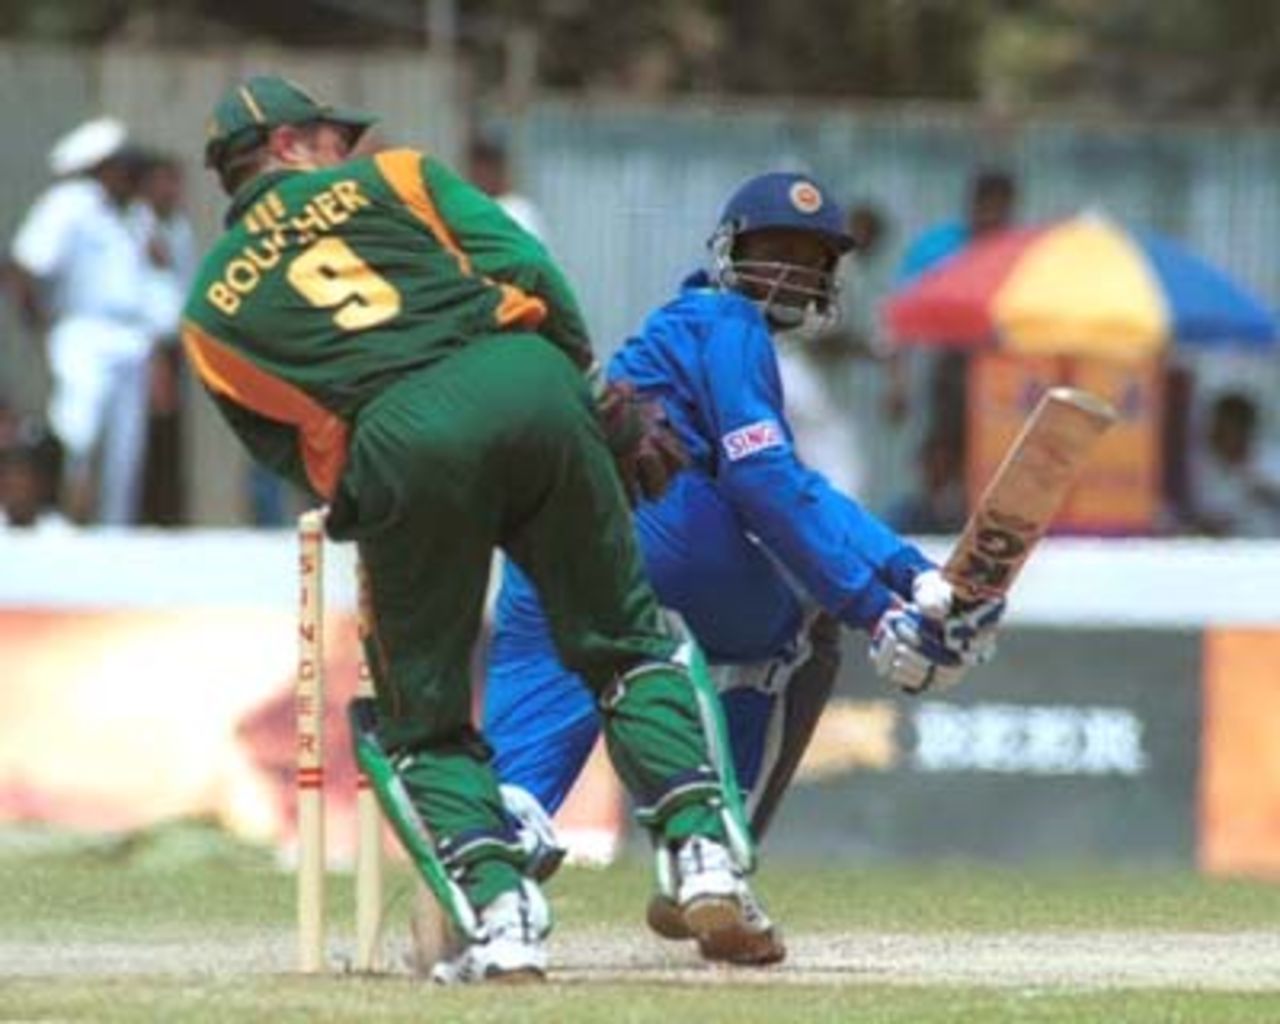 Sri Lankan batsman Russel Arnold bats during the Singer Cup Triangular limited over cricket match between Sri Lanka and South Africa in Galle international stadium in Galle Sri Lanka on Thursday, July. 6, 2000